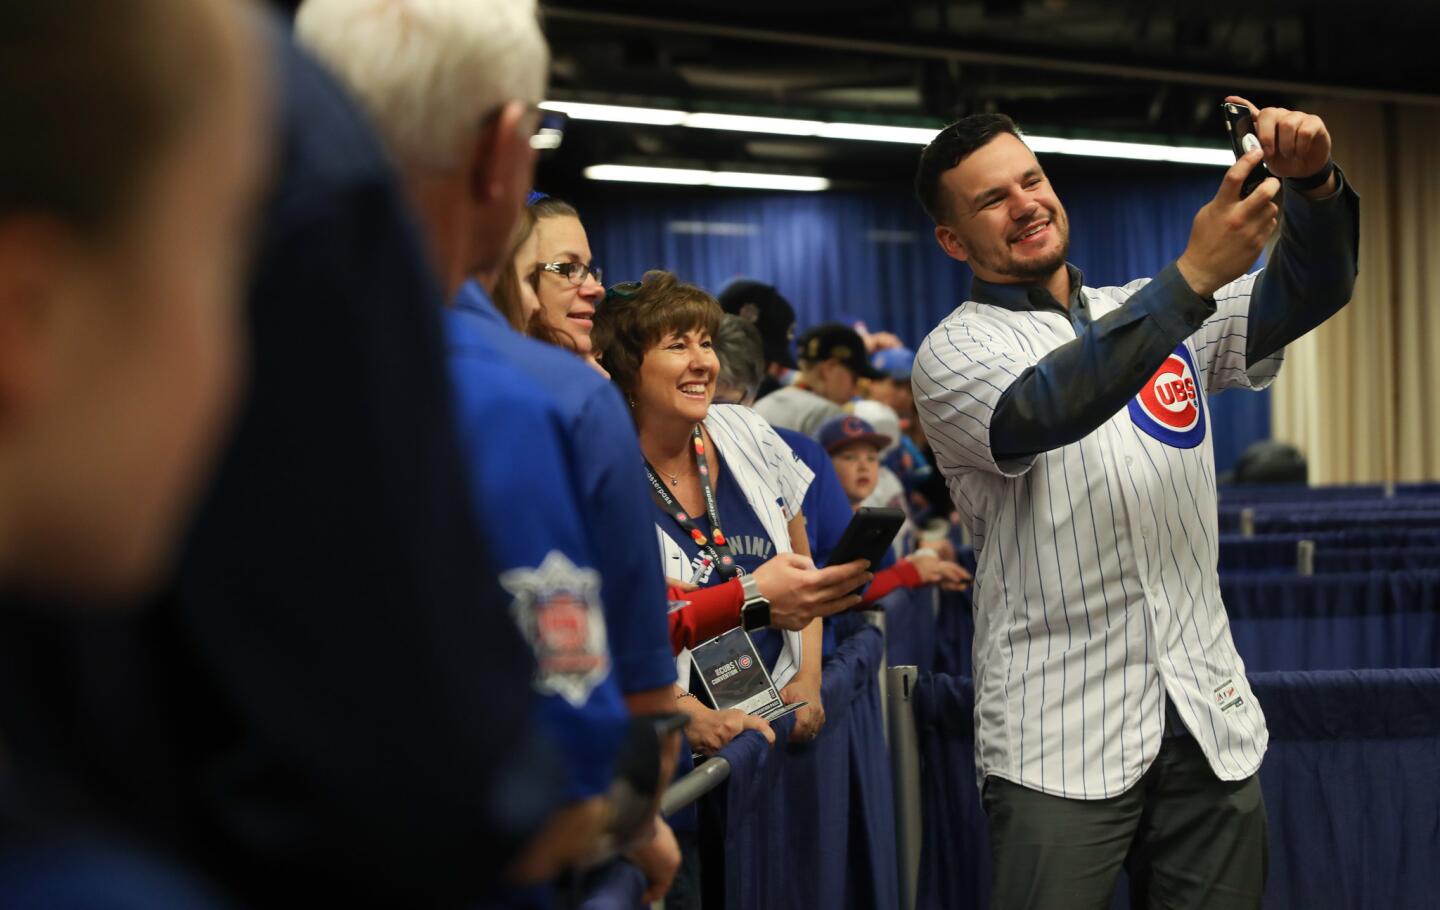 Eileen Geary, center, lends her phone to the Cubs' Kyle Schwarber, for a selfie on Saturday.